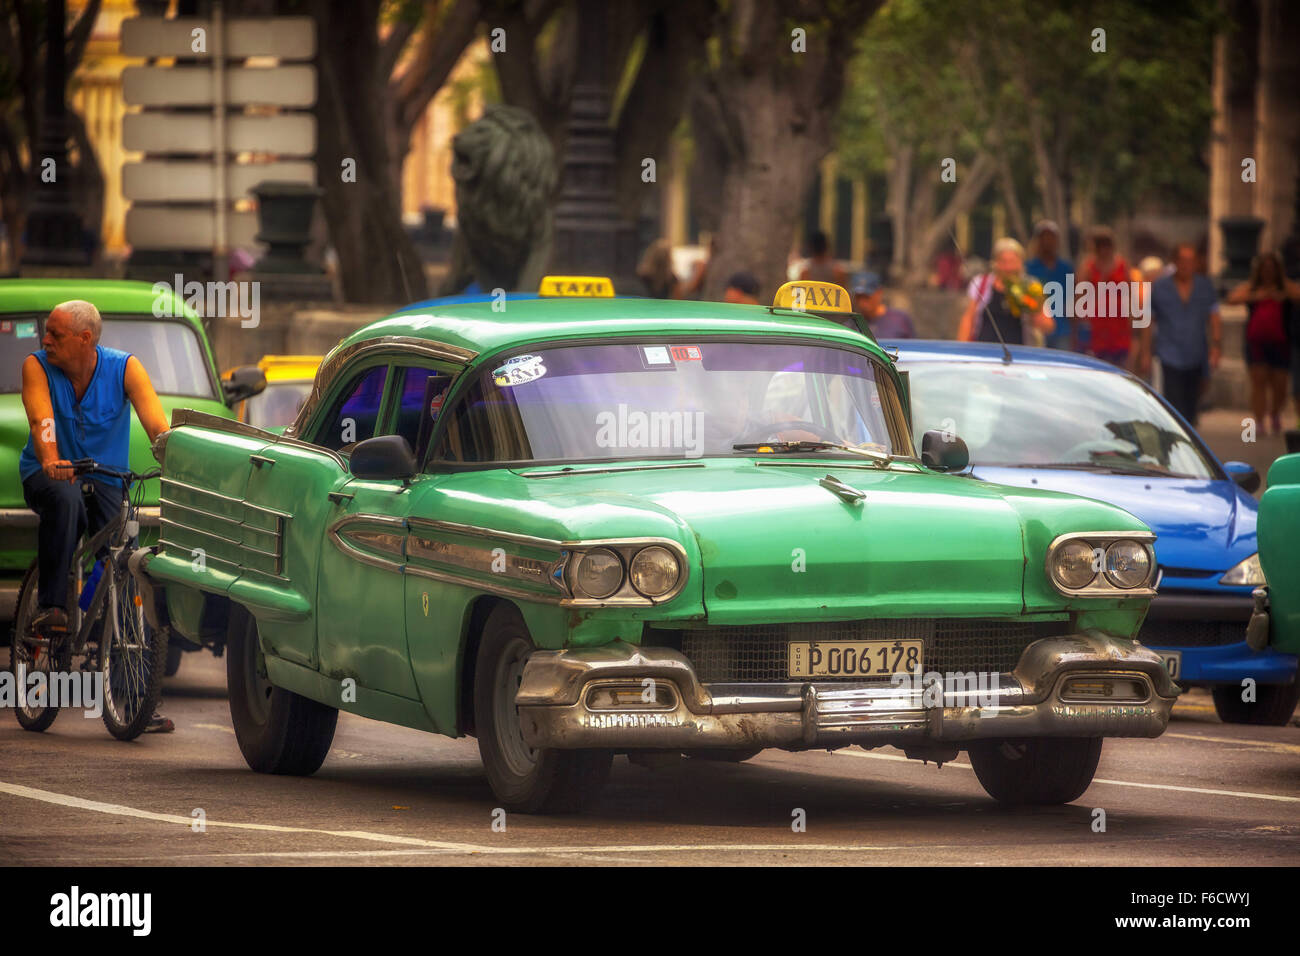 green vintage car in the street scene, old American road cruiser on the streets of Havana, taxi, public transport, La Habana, Stock Photo